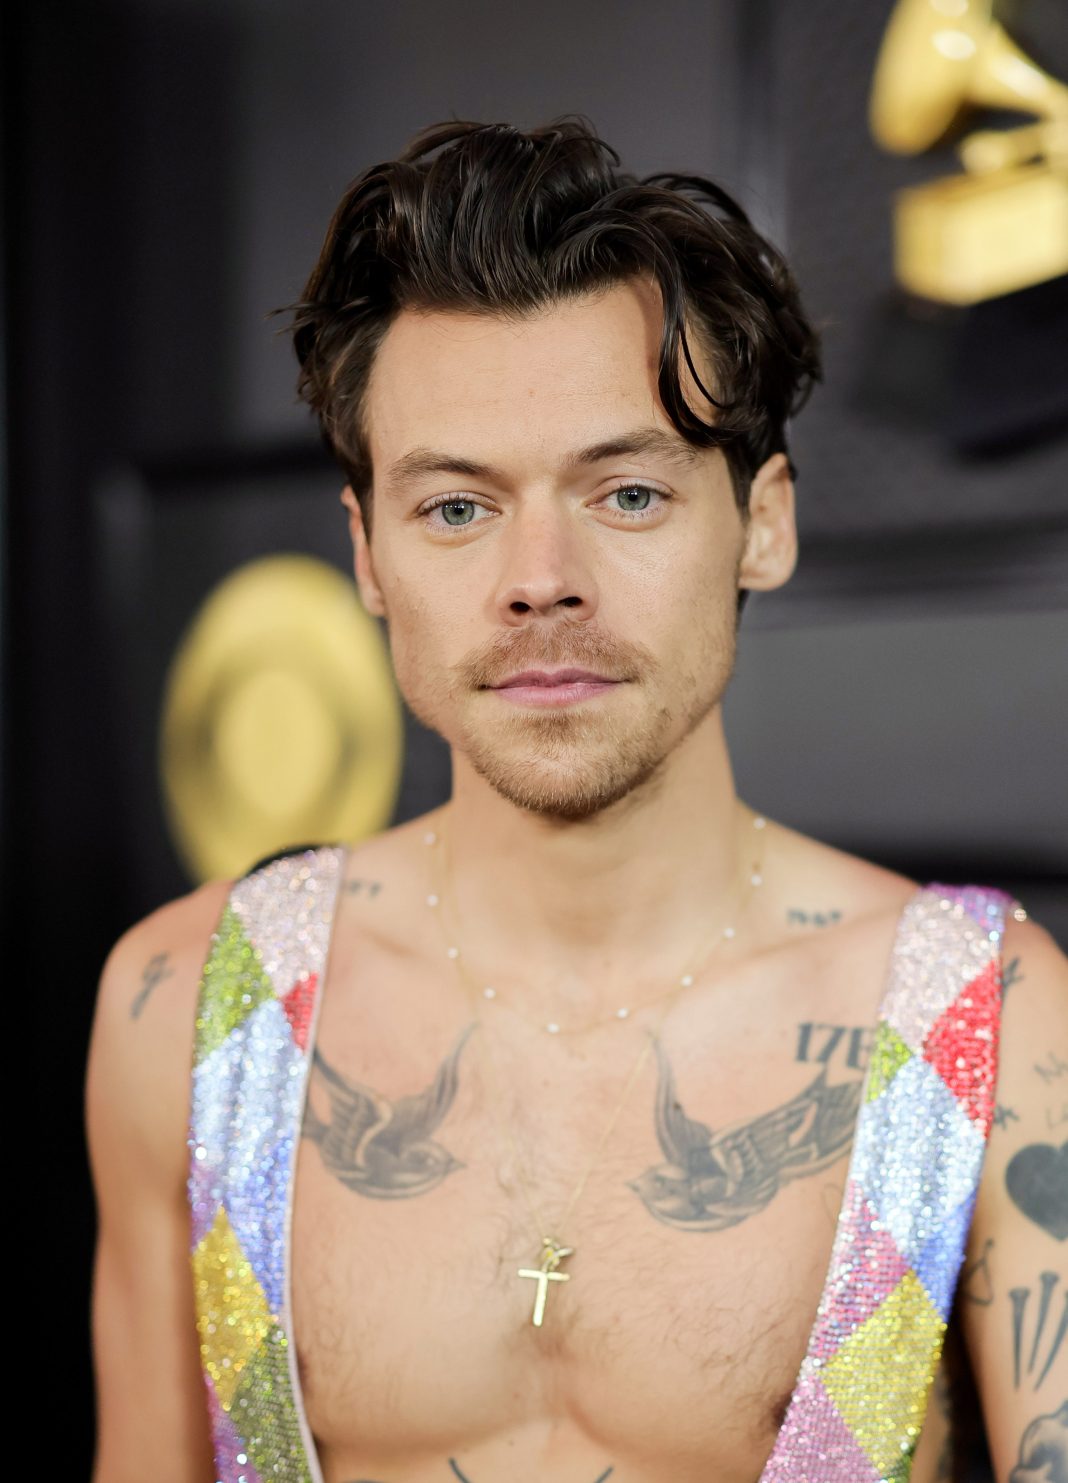 harry-styles’s-newest-wax-figure-is-so-incredibly-lifelike…-are-we-sure-it’s-fake?-—-see-photos